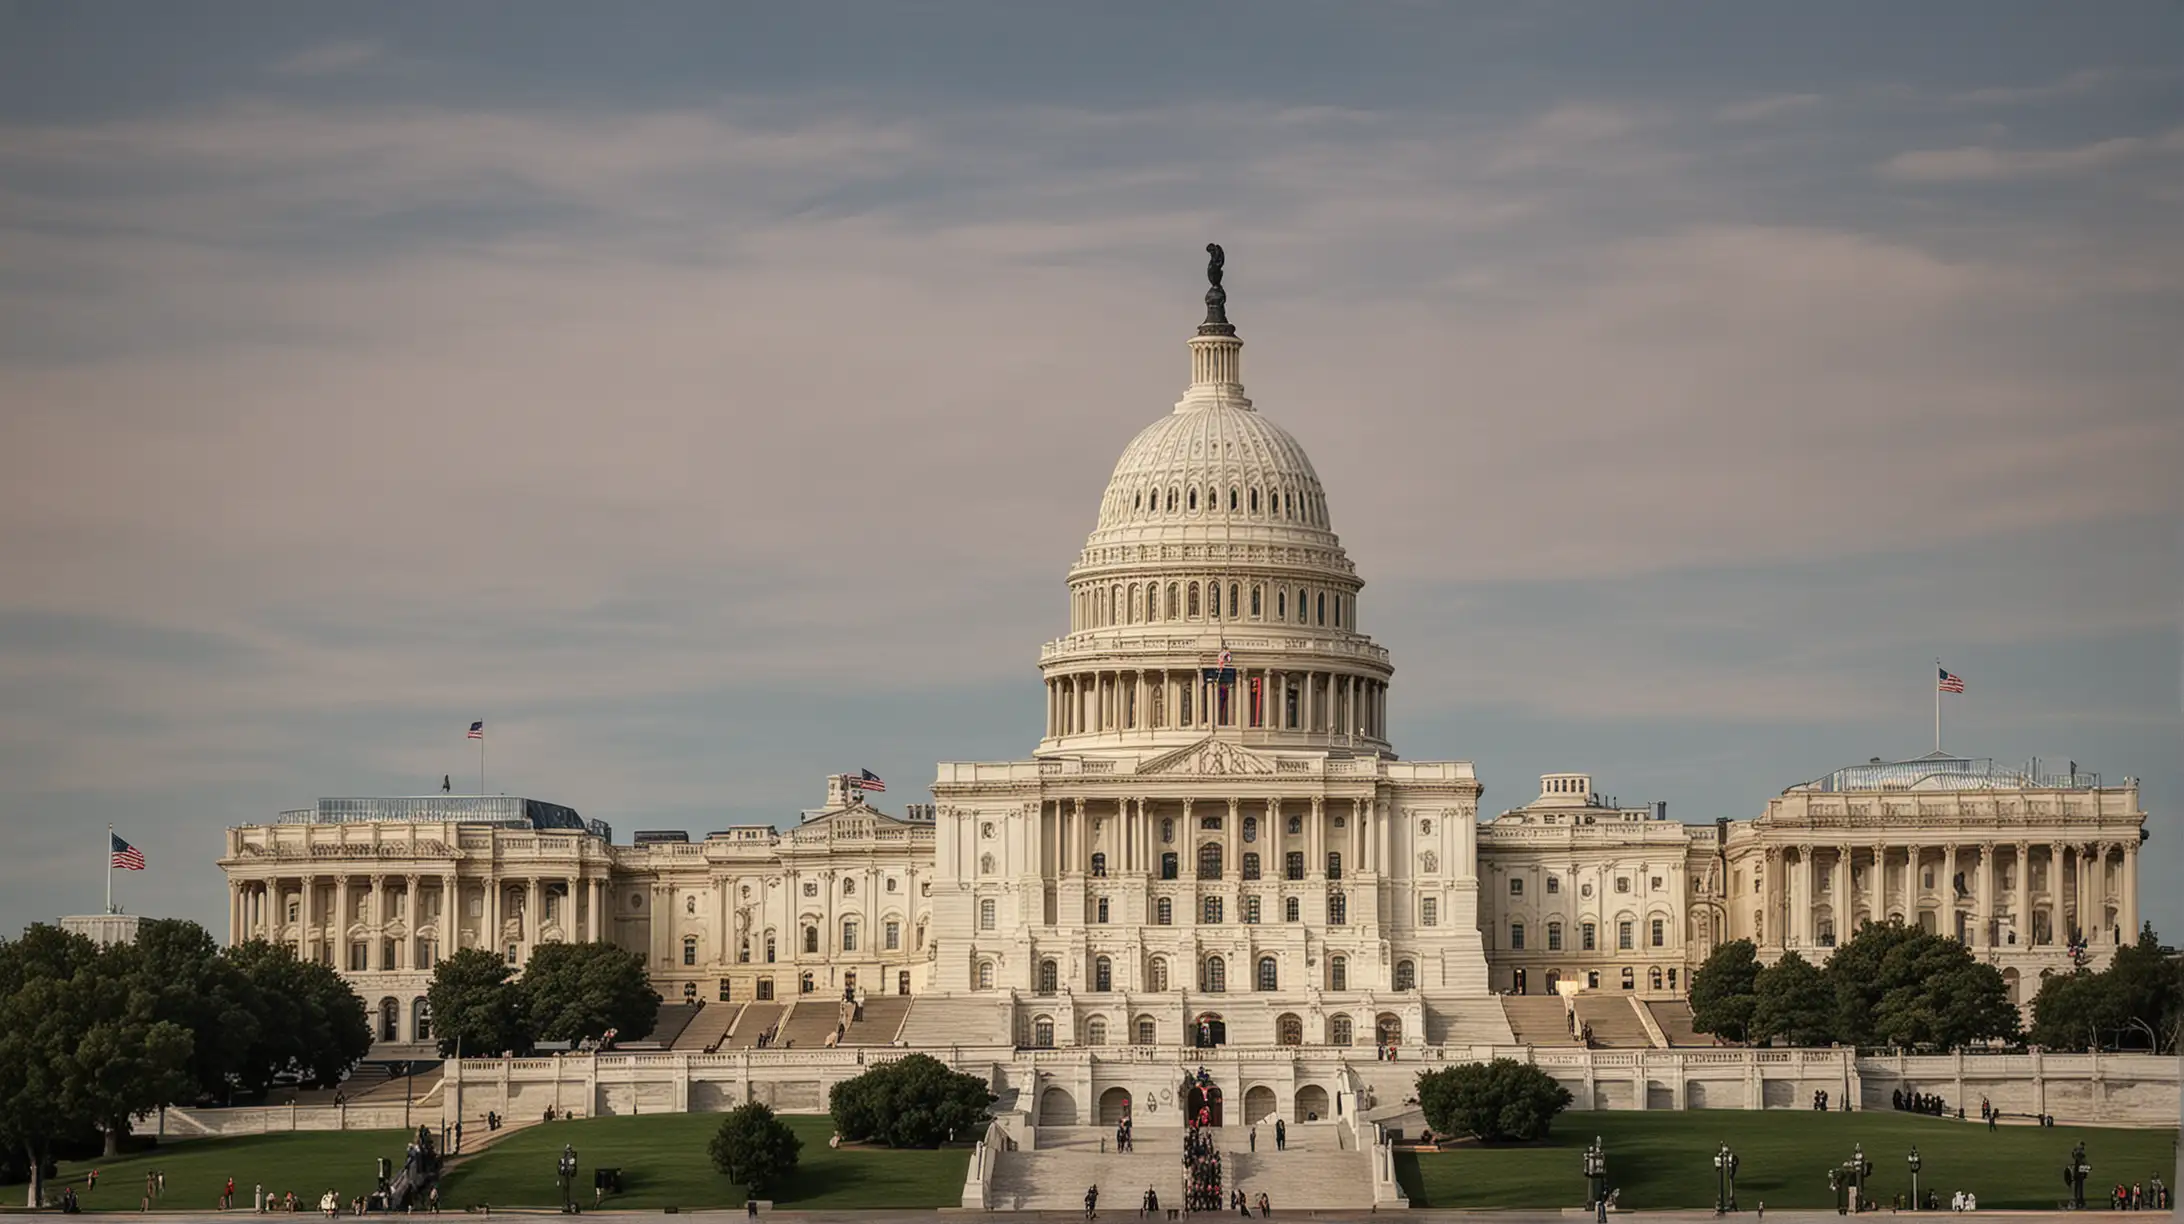 An image of the U.S. Capitol building or a timeline representing different eras in U.S. history, symbolizing the fascinating perspective that studying the history of U.S. presidents offers on the political, social, and economic development of the nation over time.